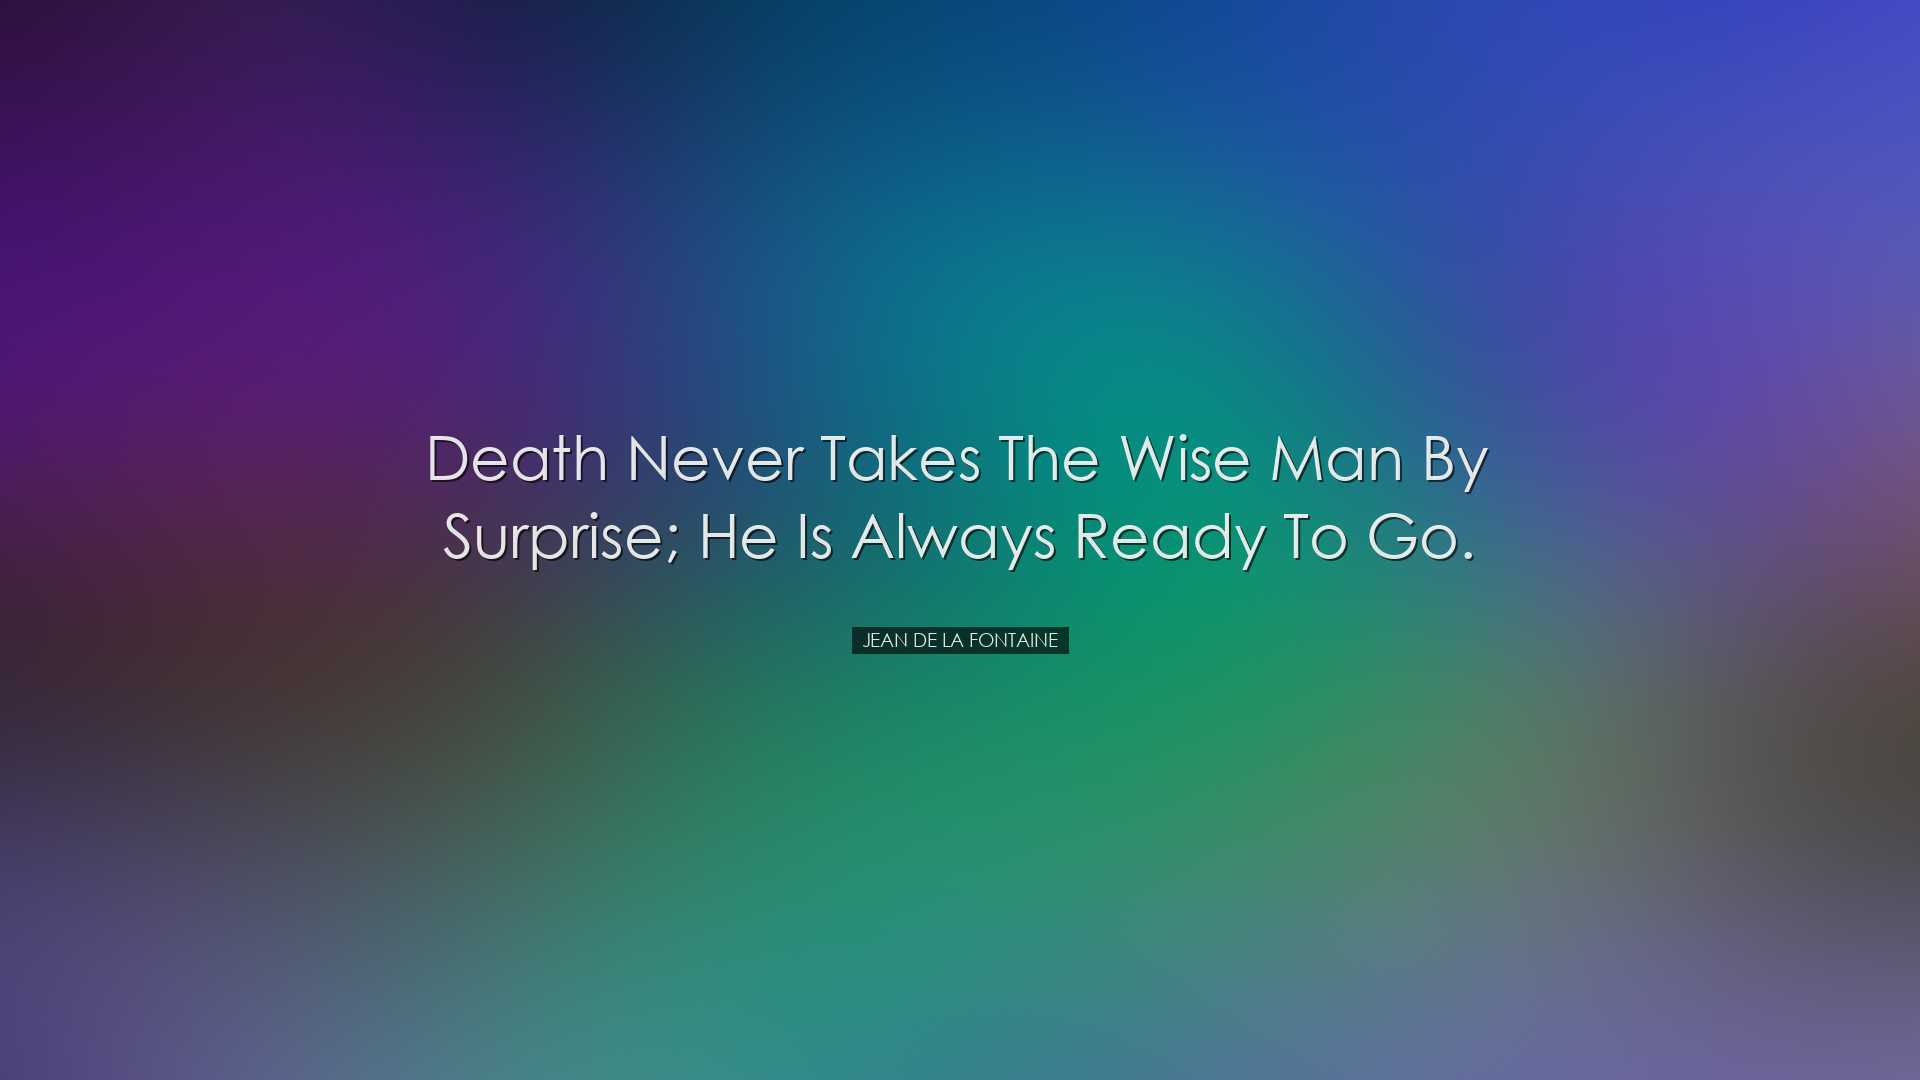 Death never takes the wise man by surprise; He is always ready to